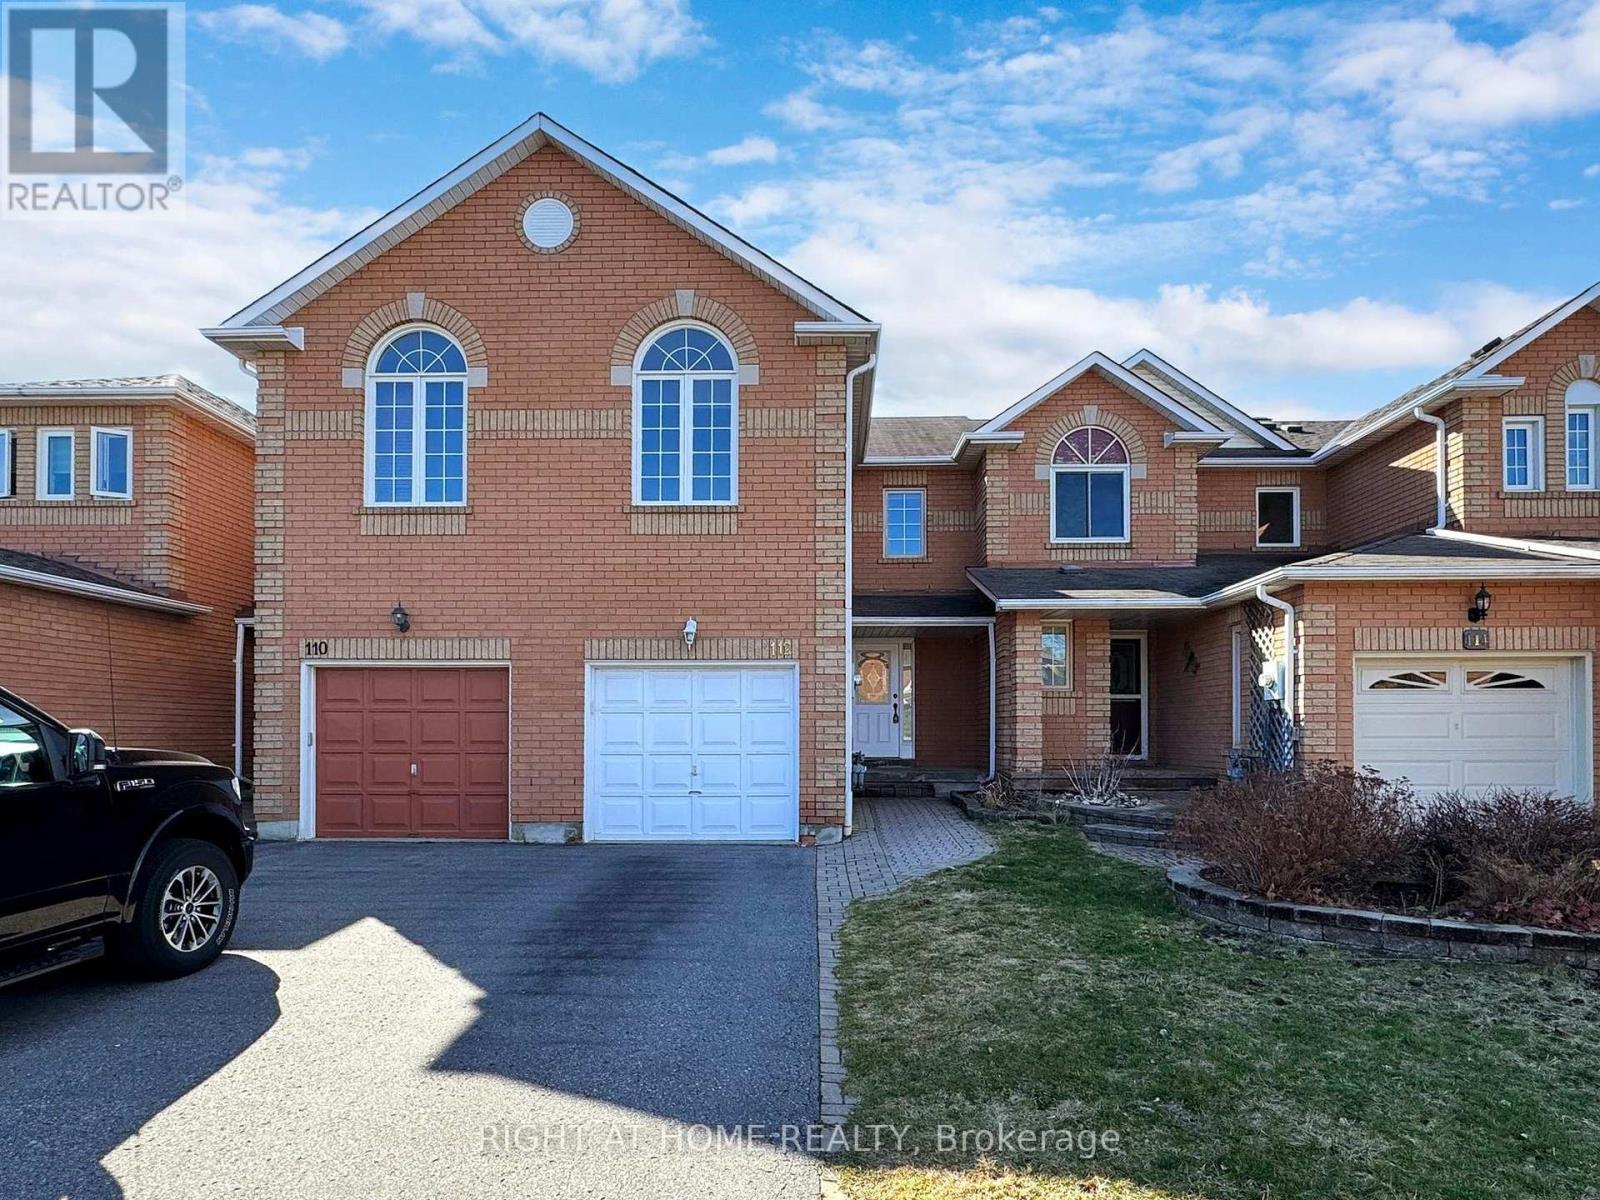 112 CREEKWOOD CRES located in Whitby, Ontario